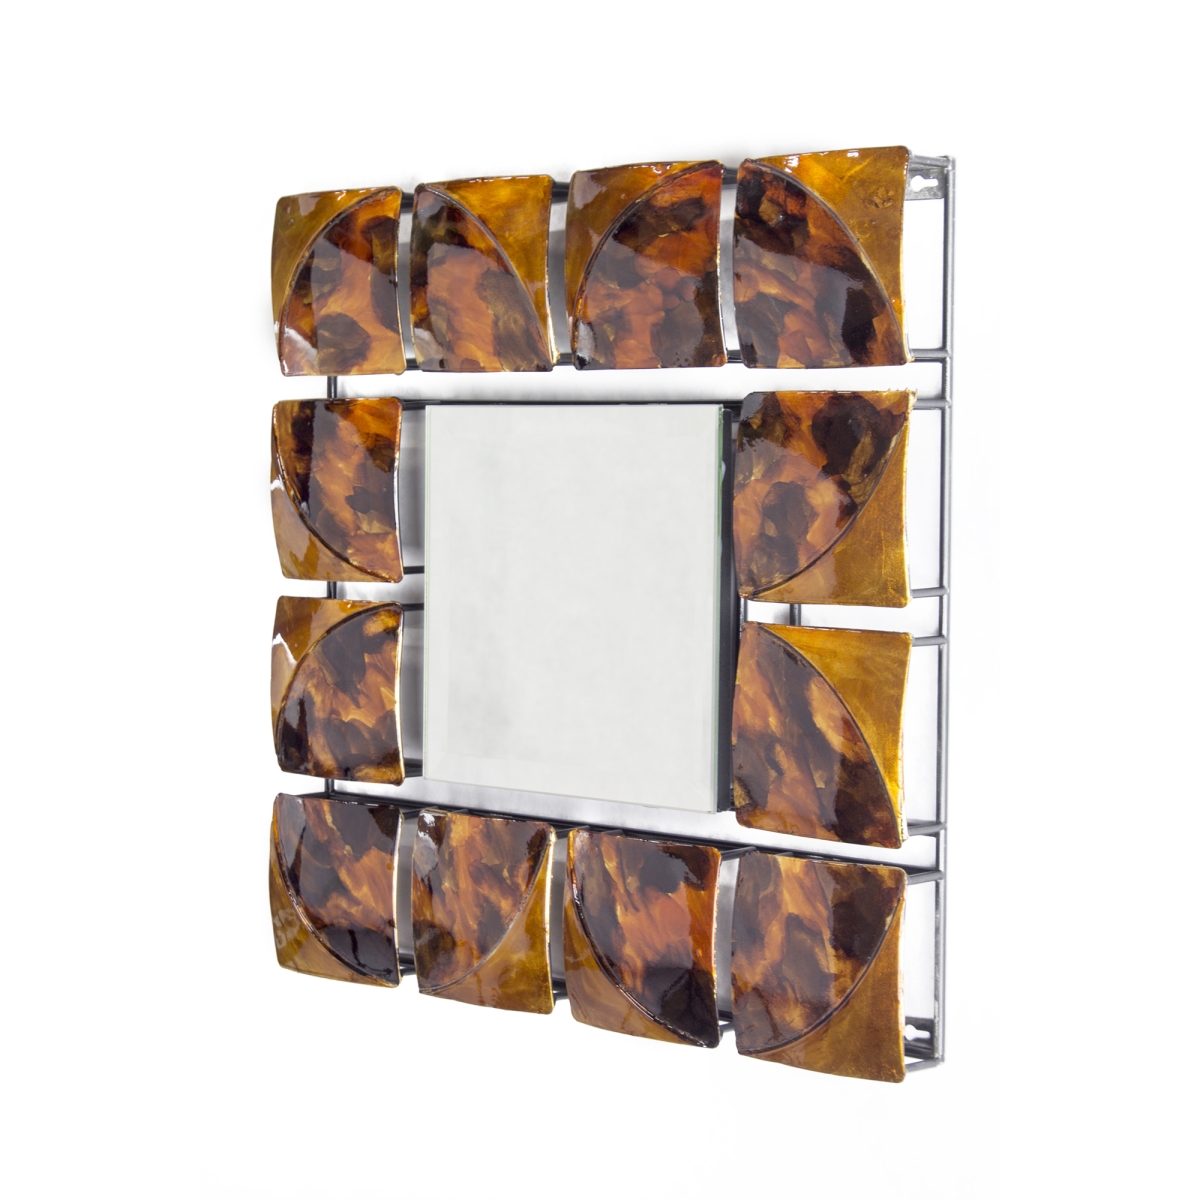 W08639-03 Tinsley Square Foiled & Lacquered Hanging Wall Mirror, Gold, Copper & Brown - 1.75 X 17.5 X 17.5 In.